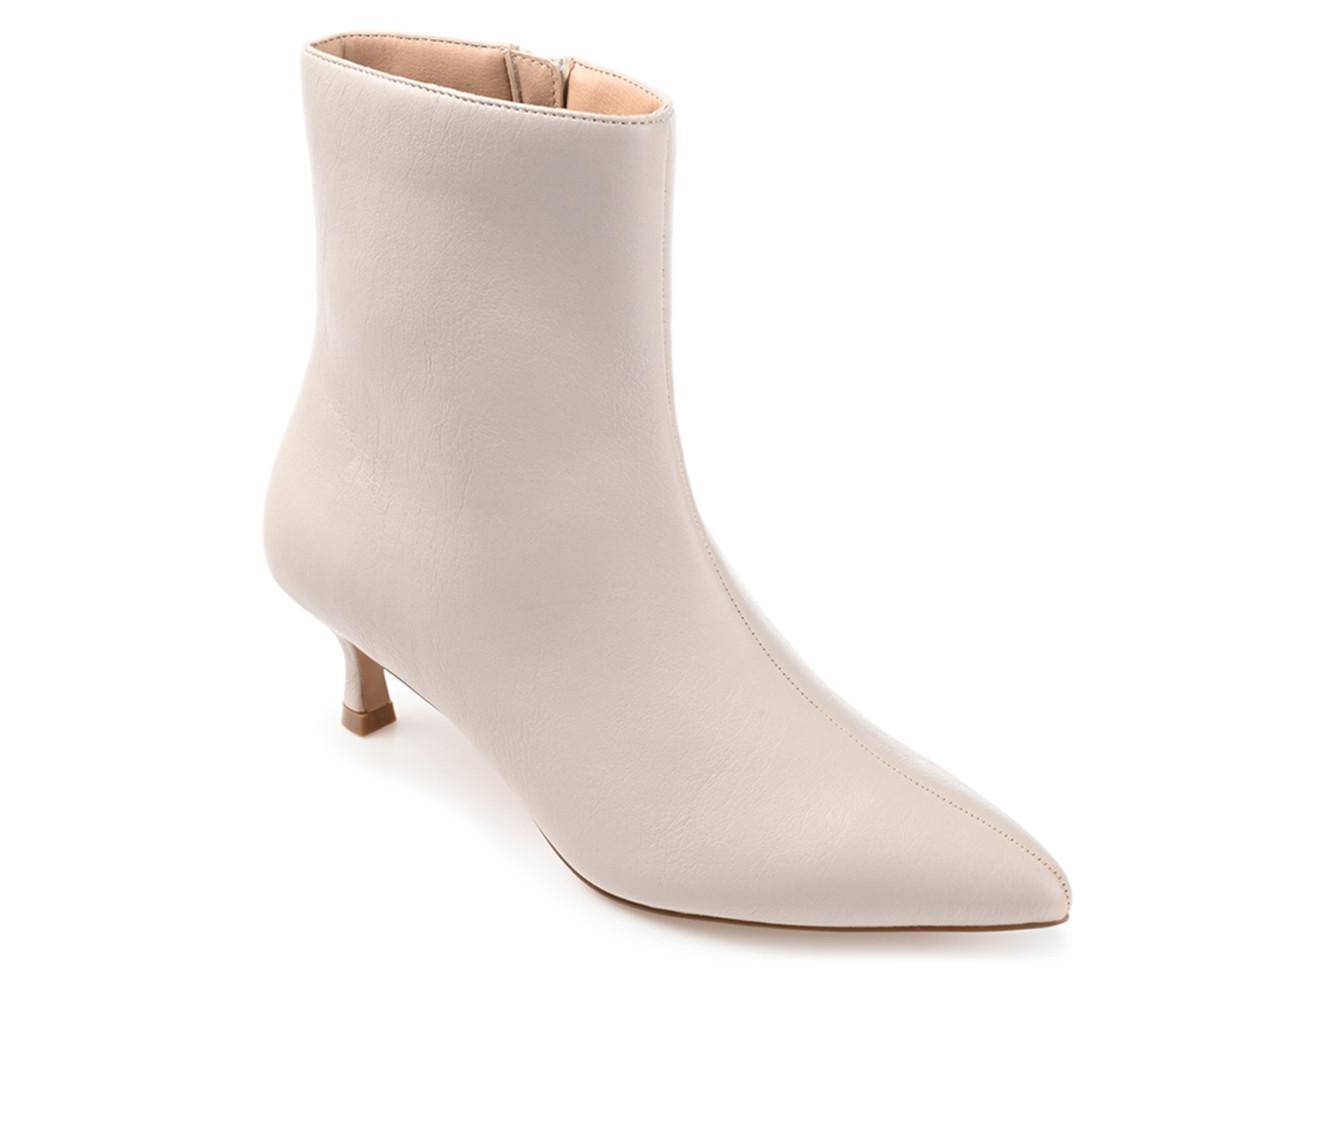 Women's Journee Collection Arely Booties